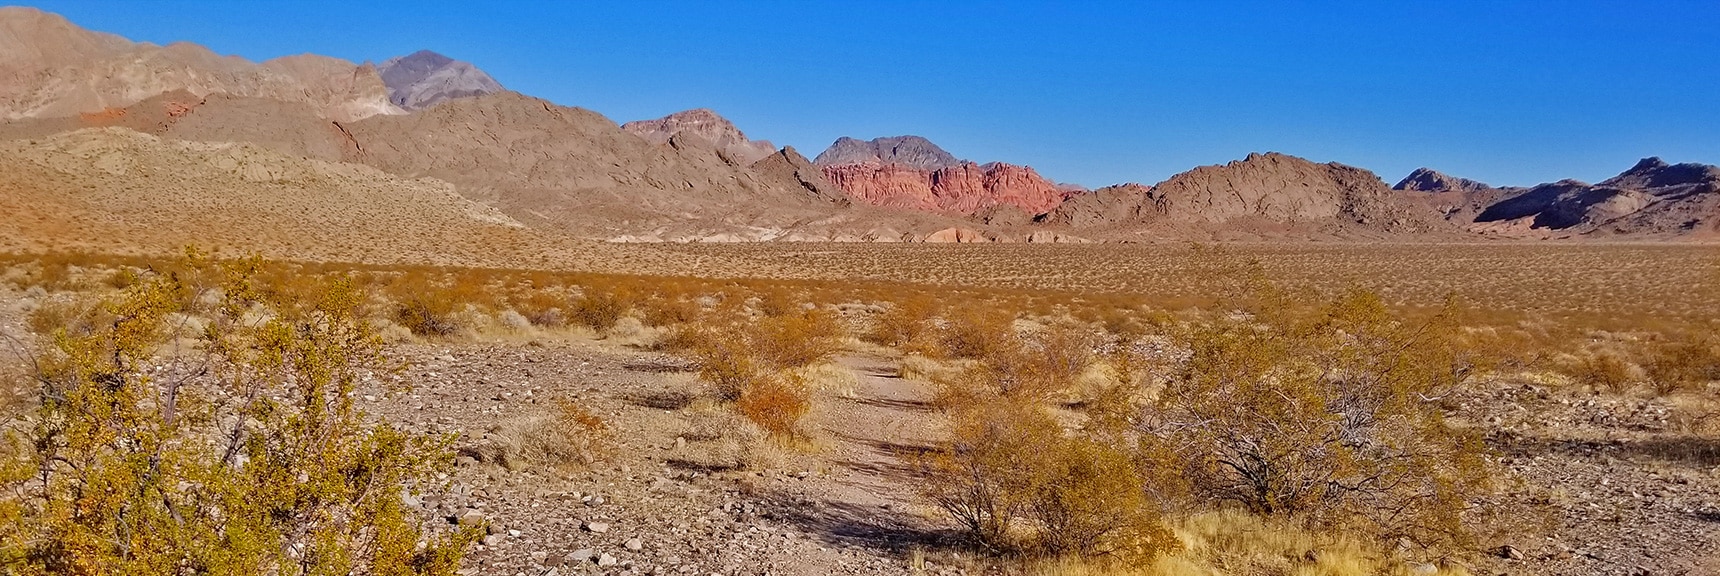 Northern Bowl of Fire Viewed from Mile 18 on North Shore Rd. | Bowl of Fire, Lake Mead National Recreation Area, Nevada